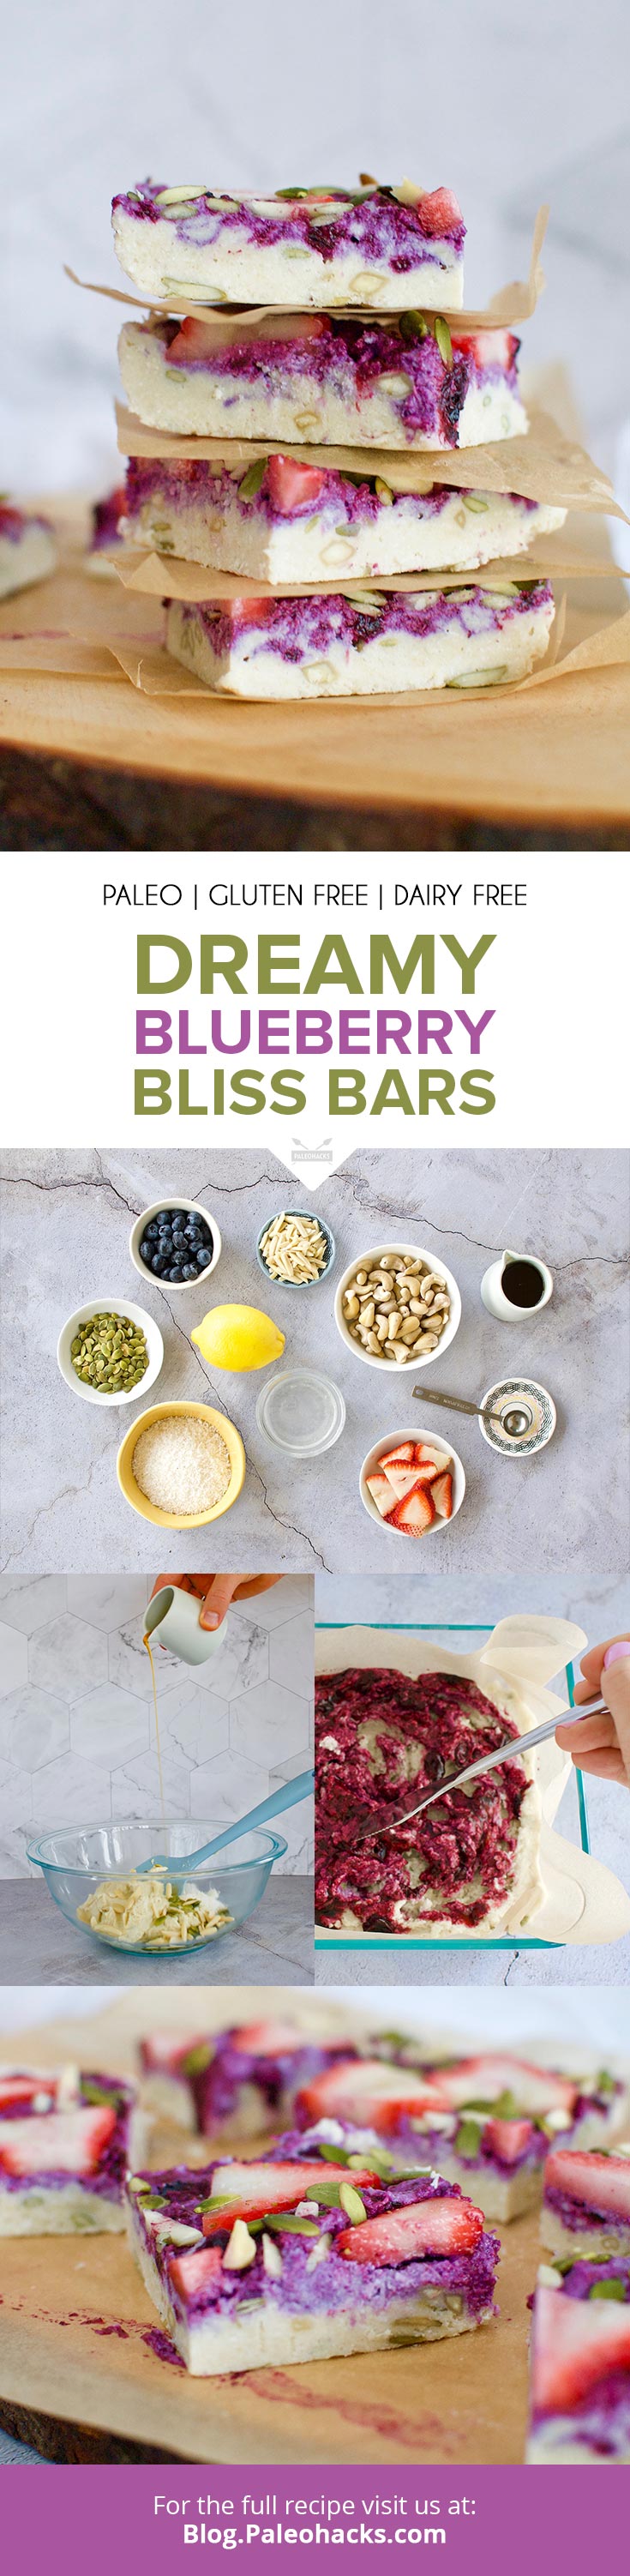 Recreate your favorite coffeehouse bliss bars with a fruity makeover consisting of fresh berries, coconut, & creamy cashews. Right in time for berry season!